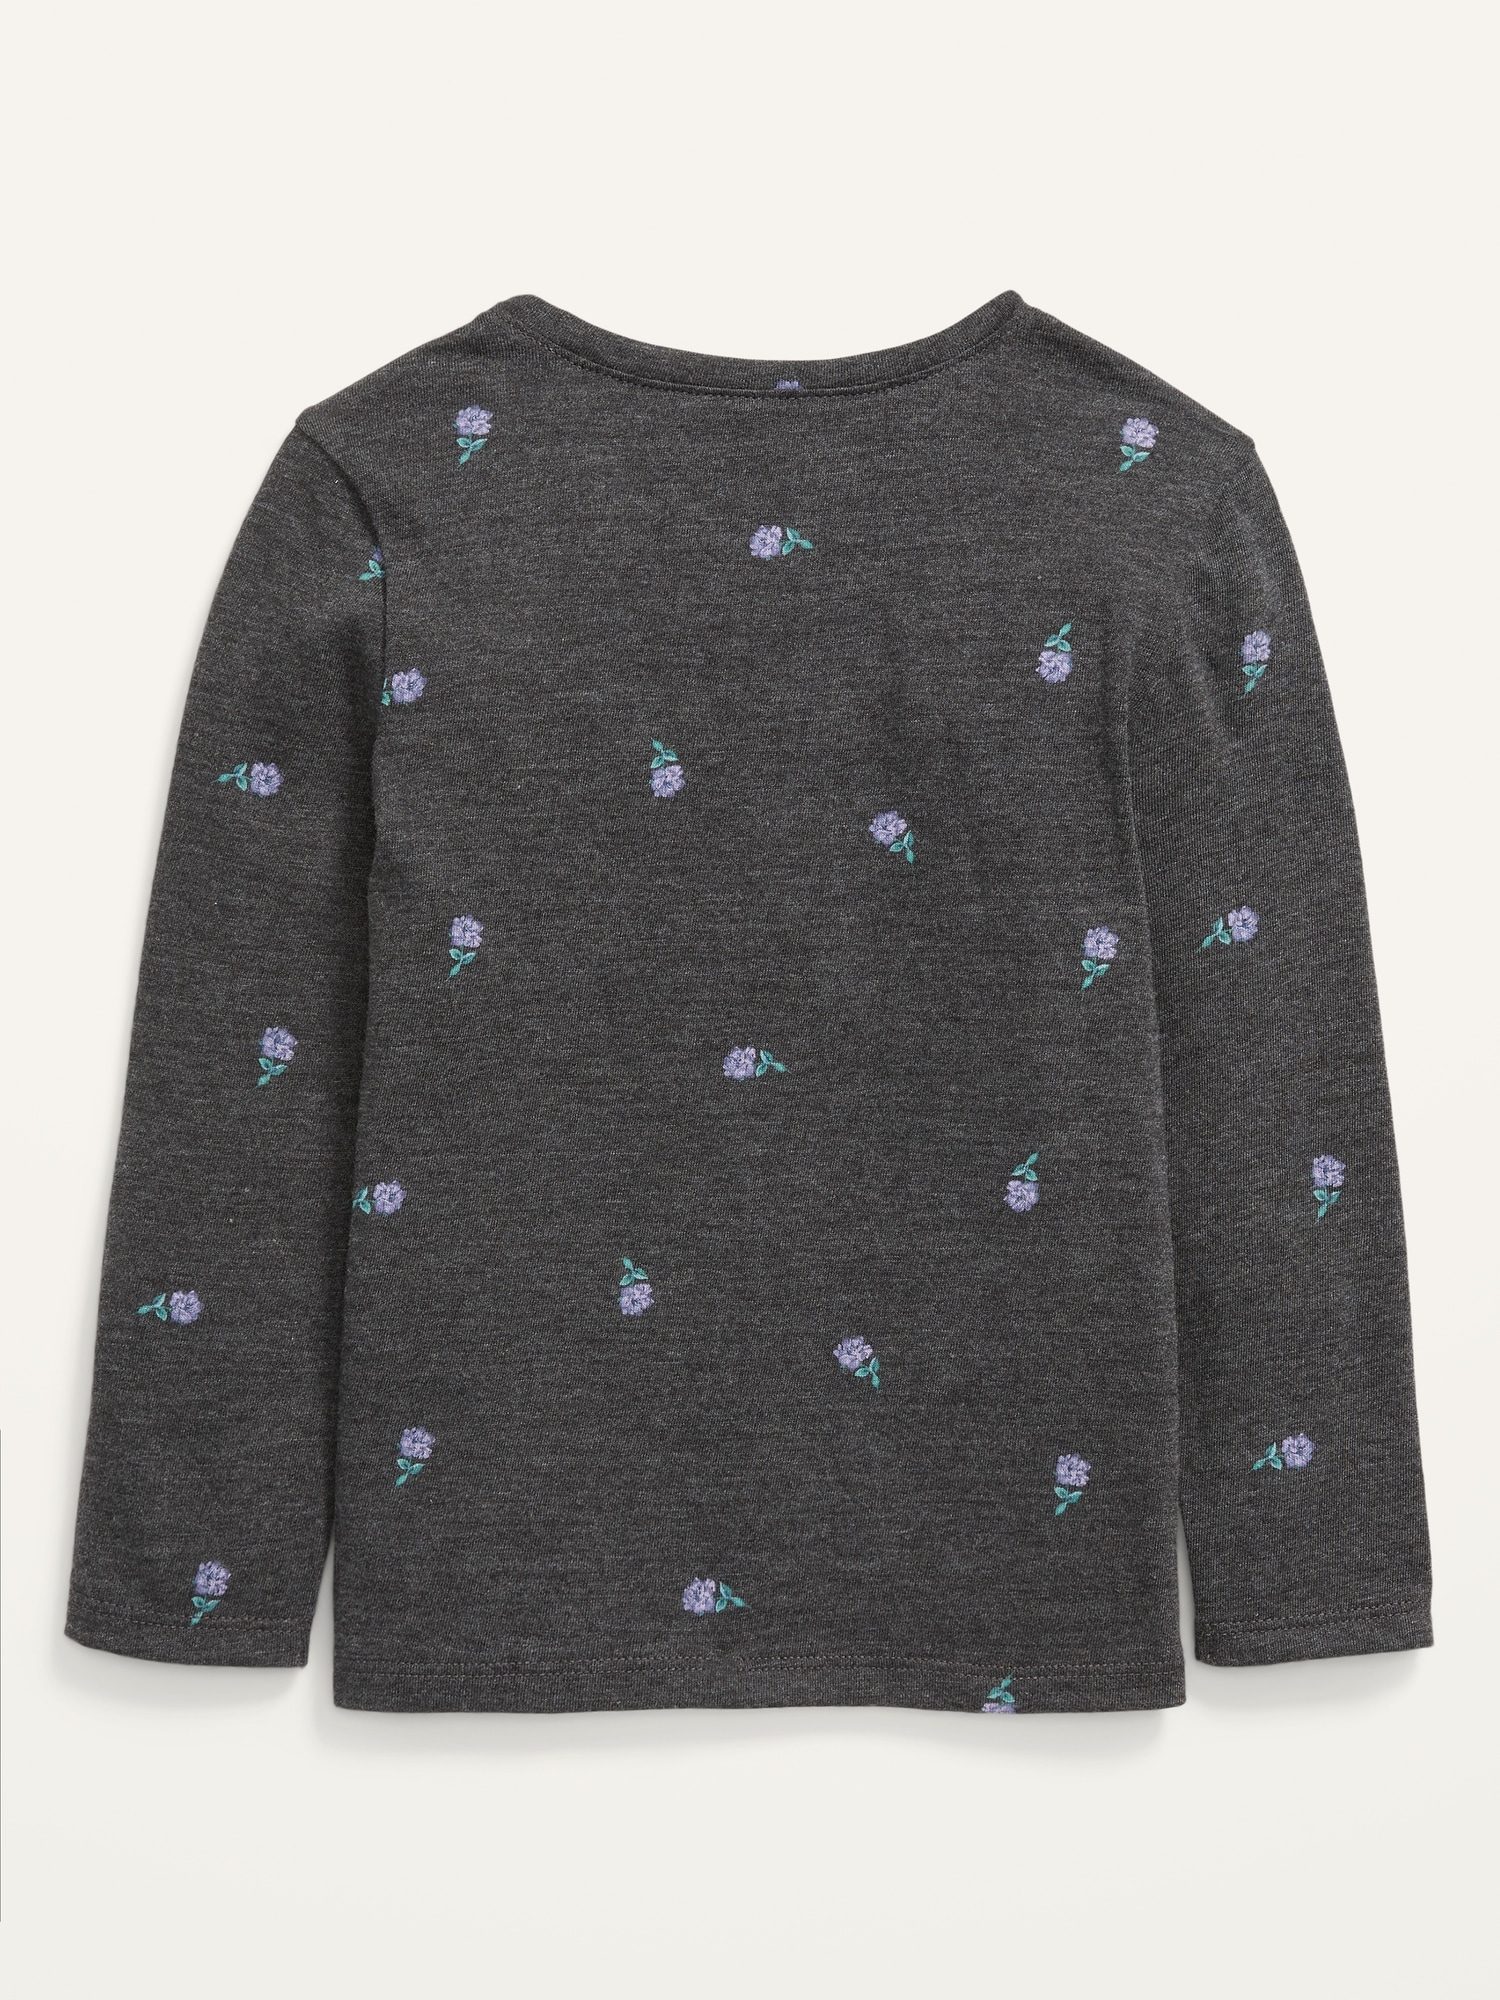 Unisex Long-Sleeve Floral T-Shirt for Toddler | Old Navy